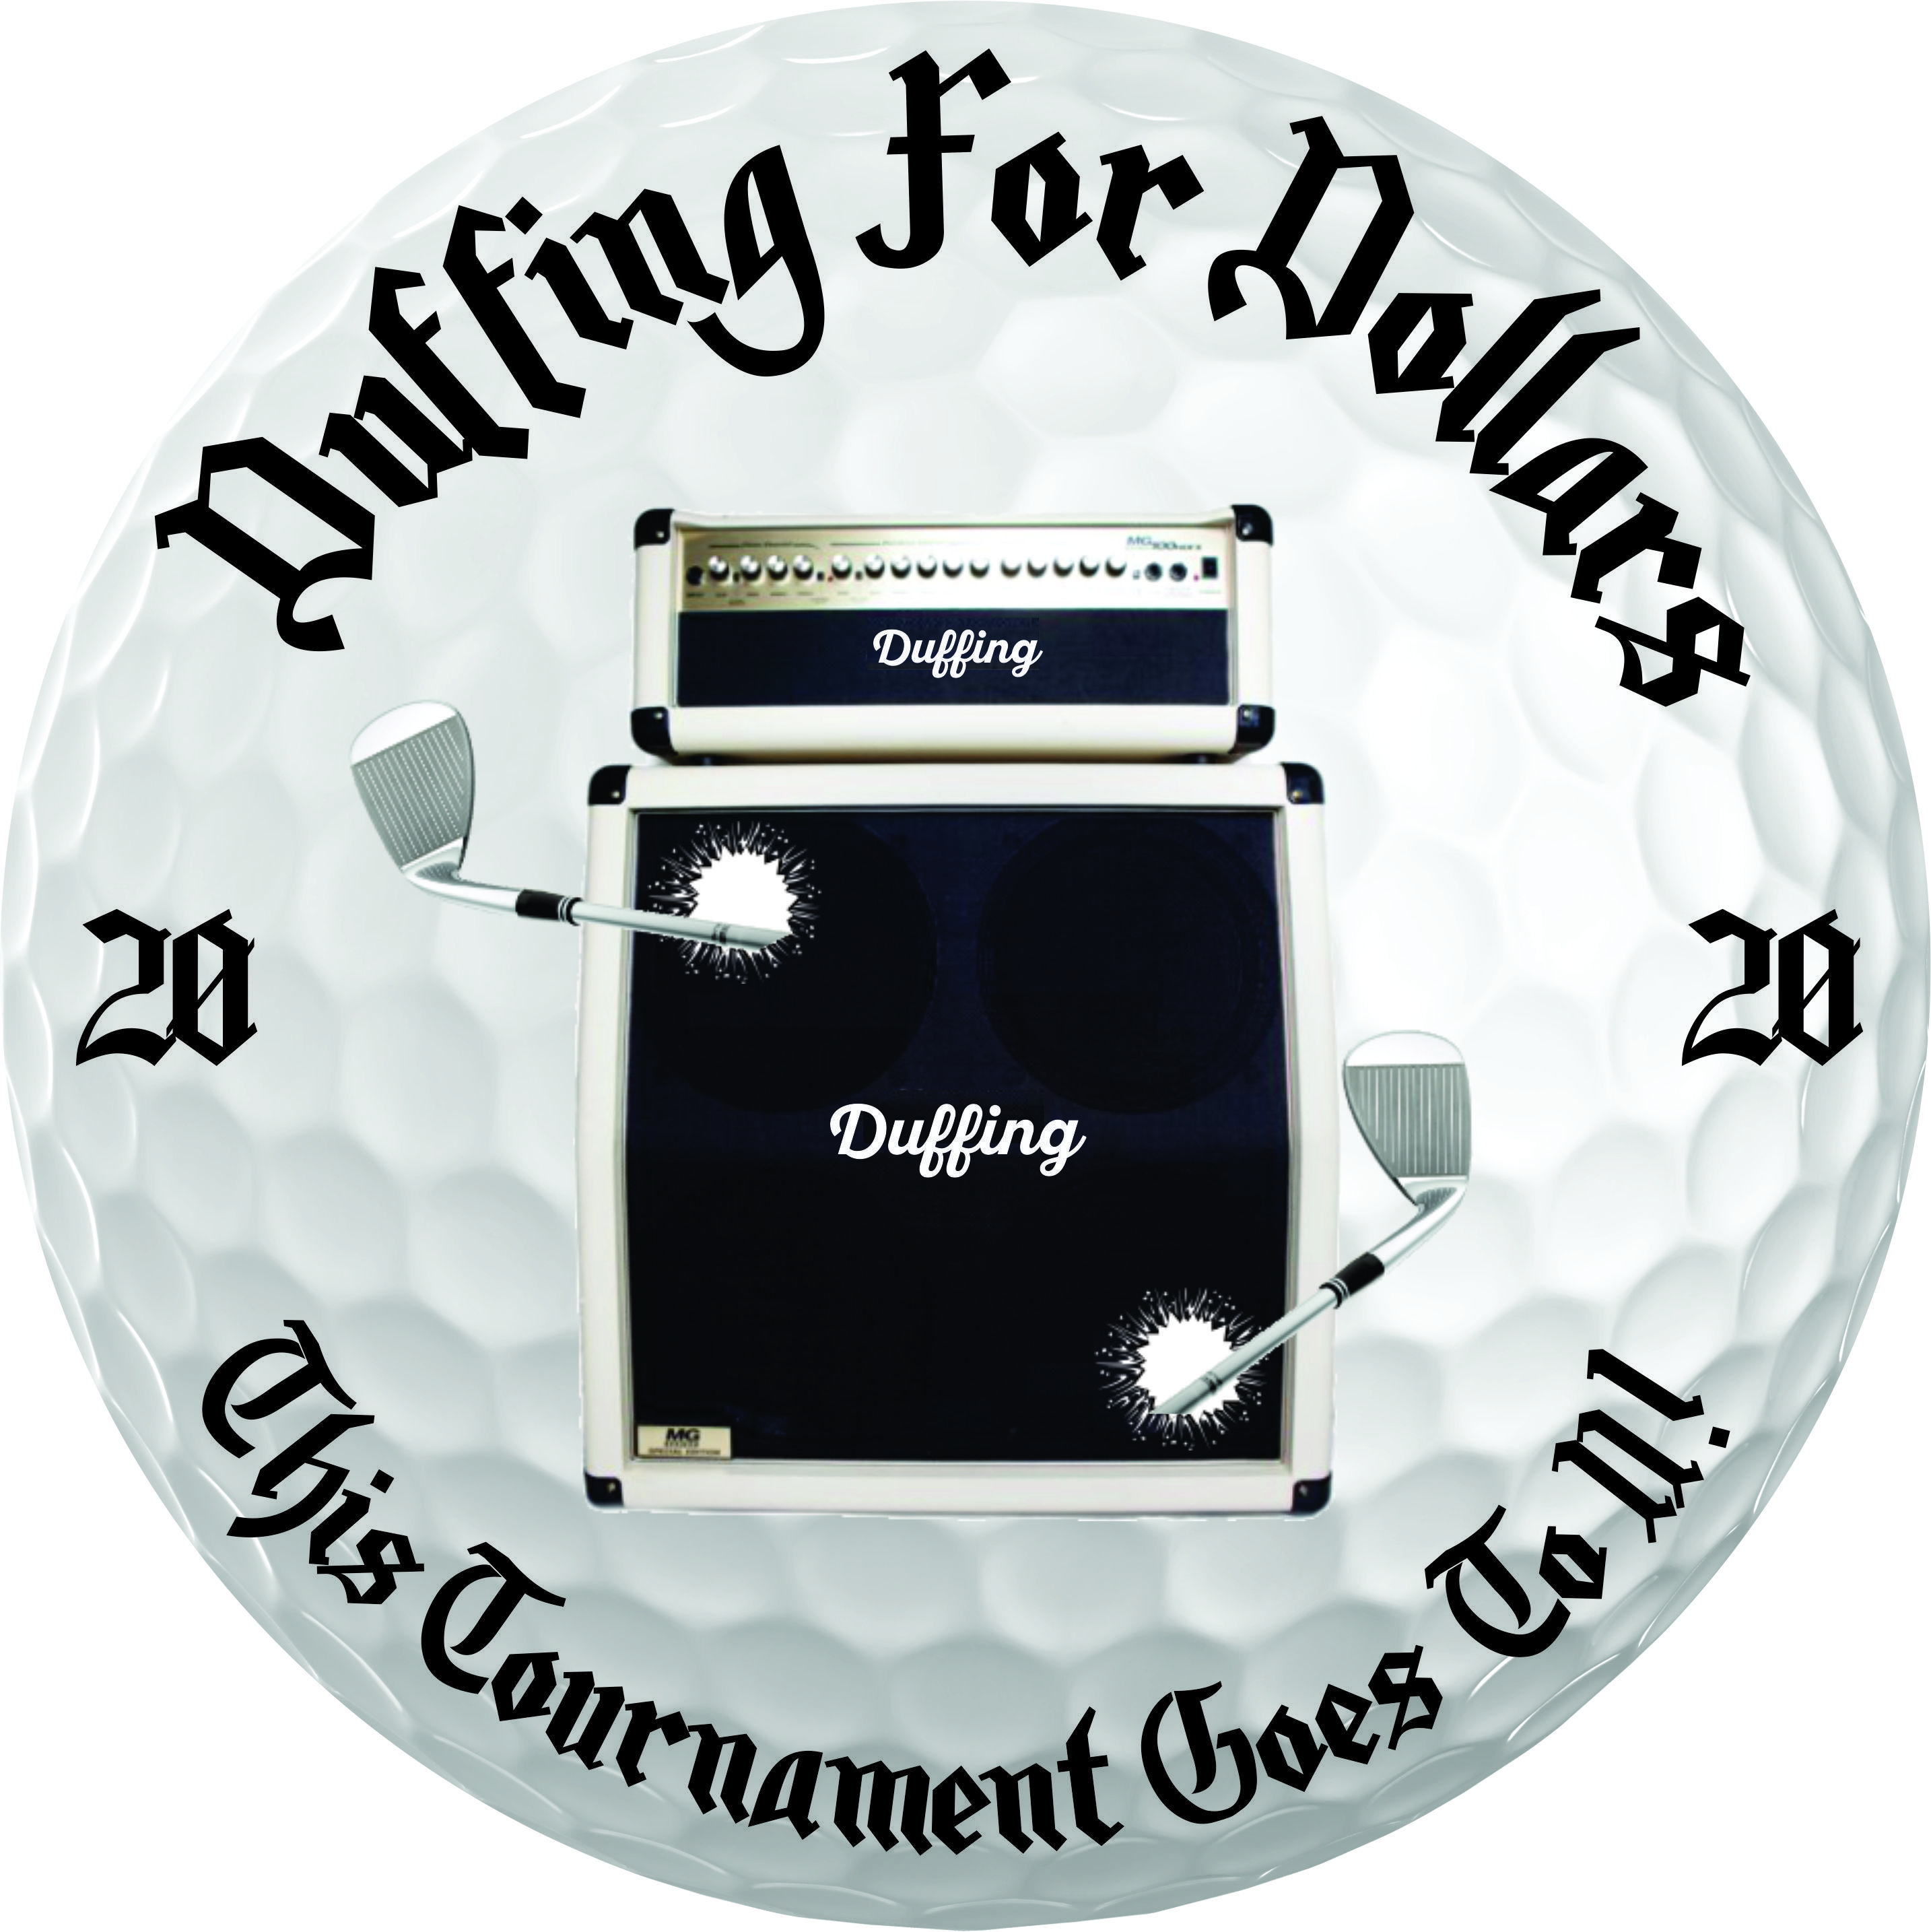 2020 Duffing For Dollars Charity Golf Tournament & Dinner